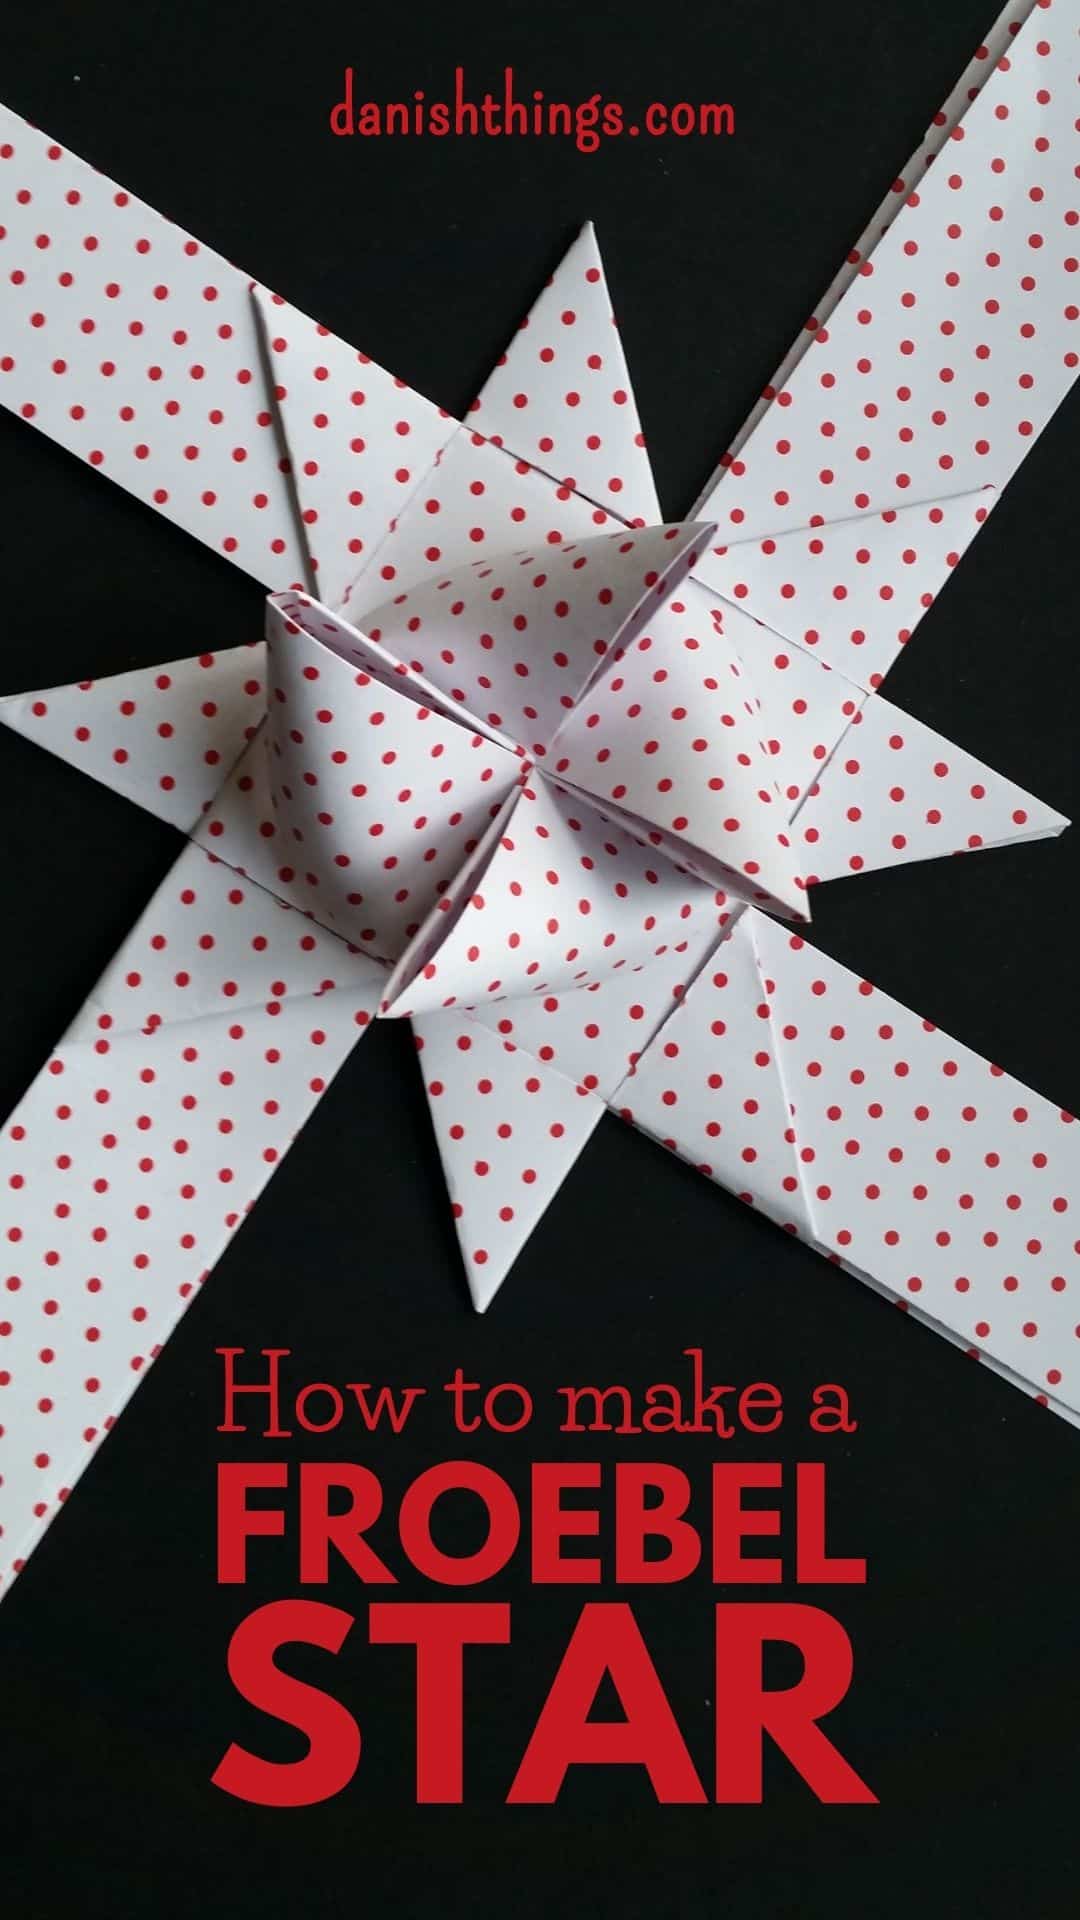  How to make a Froebel star - a classic Danish Christmas decoration. A Christmas star - step-by-step guide. Whether you weave or fold paper stars, if you are a beginner or experienced, you will get help with text, photos, and videos for every step. Find recipes, step-by-step guides, free print, and inspiration for this time of year at danishthings.com © Christel Parby - Danish Things #DanishThings #froebelstar #frobelstern #paperstar #paper #star #howto #howtoguide #danish #christmas #decoration #homemade #decoration #danishchristmas #danishstar #adventstar #advent #nordic #german #christmasstar